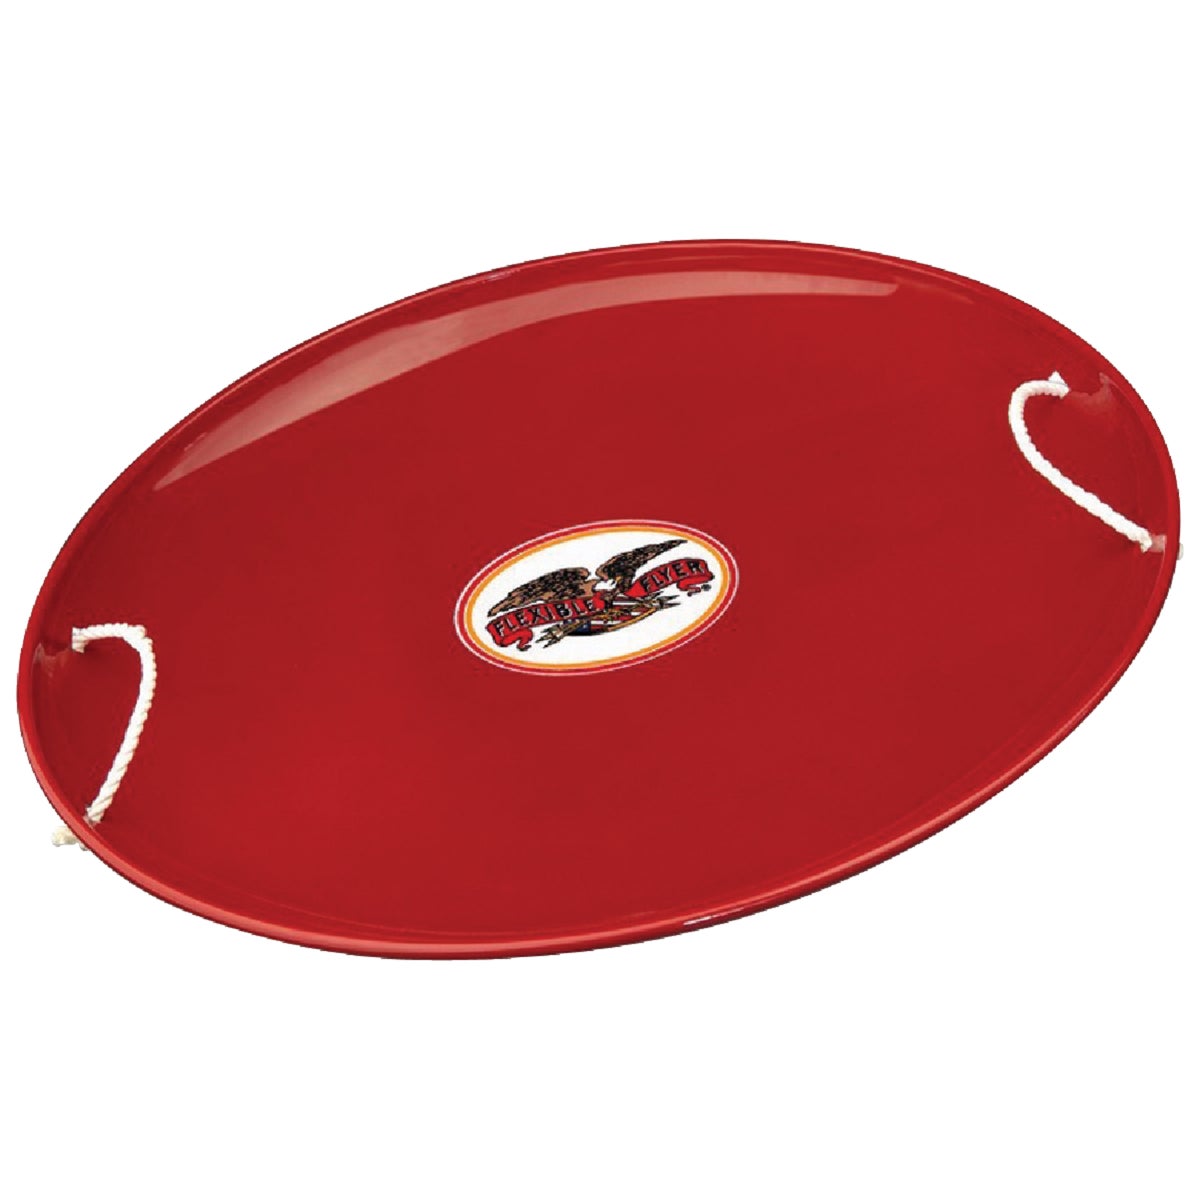 RED 26″ STEEL SAUCER